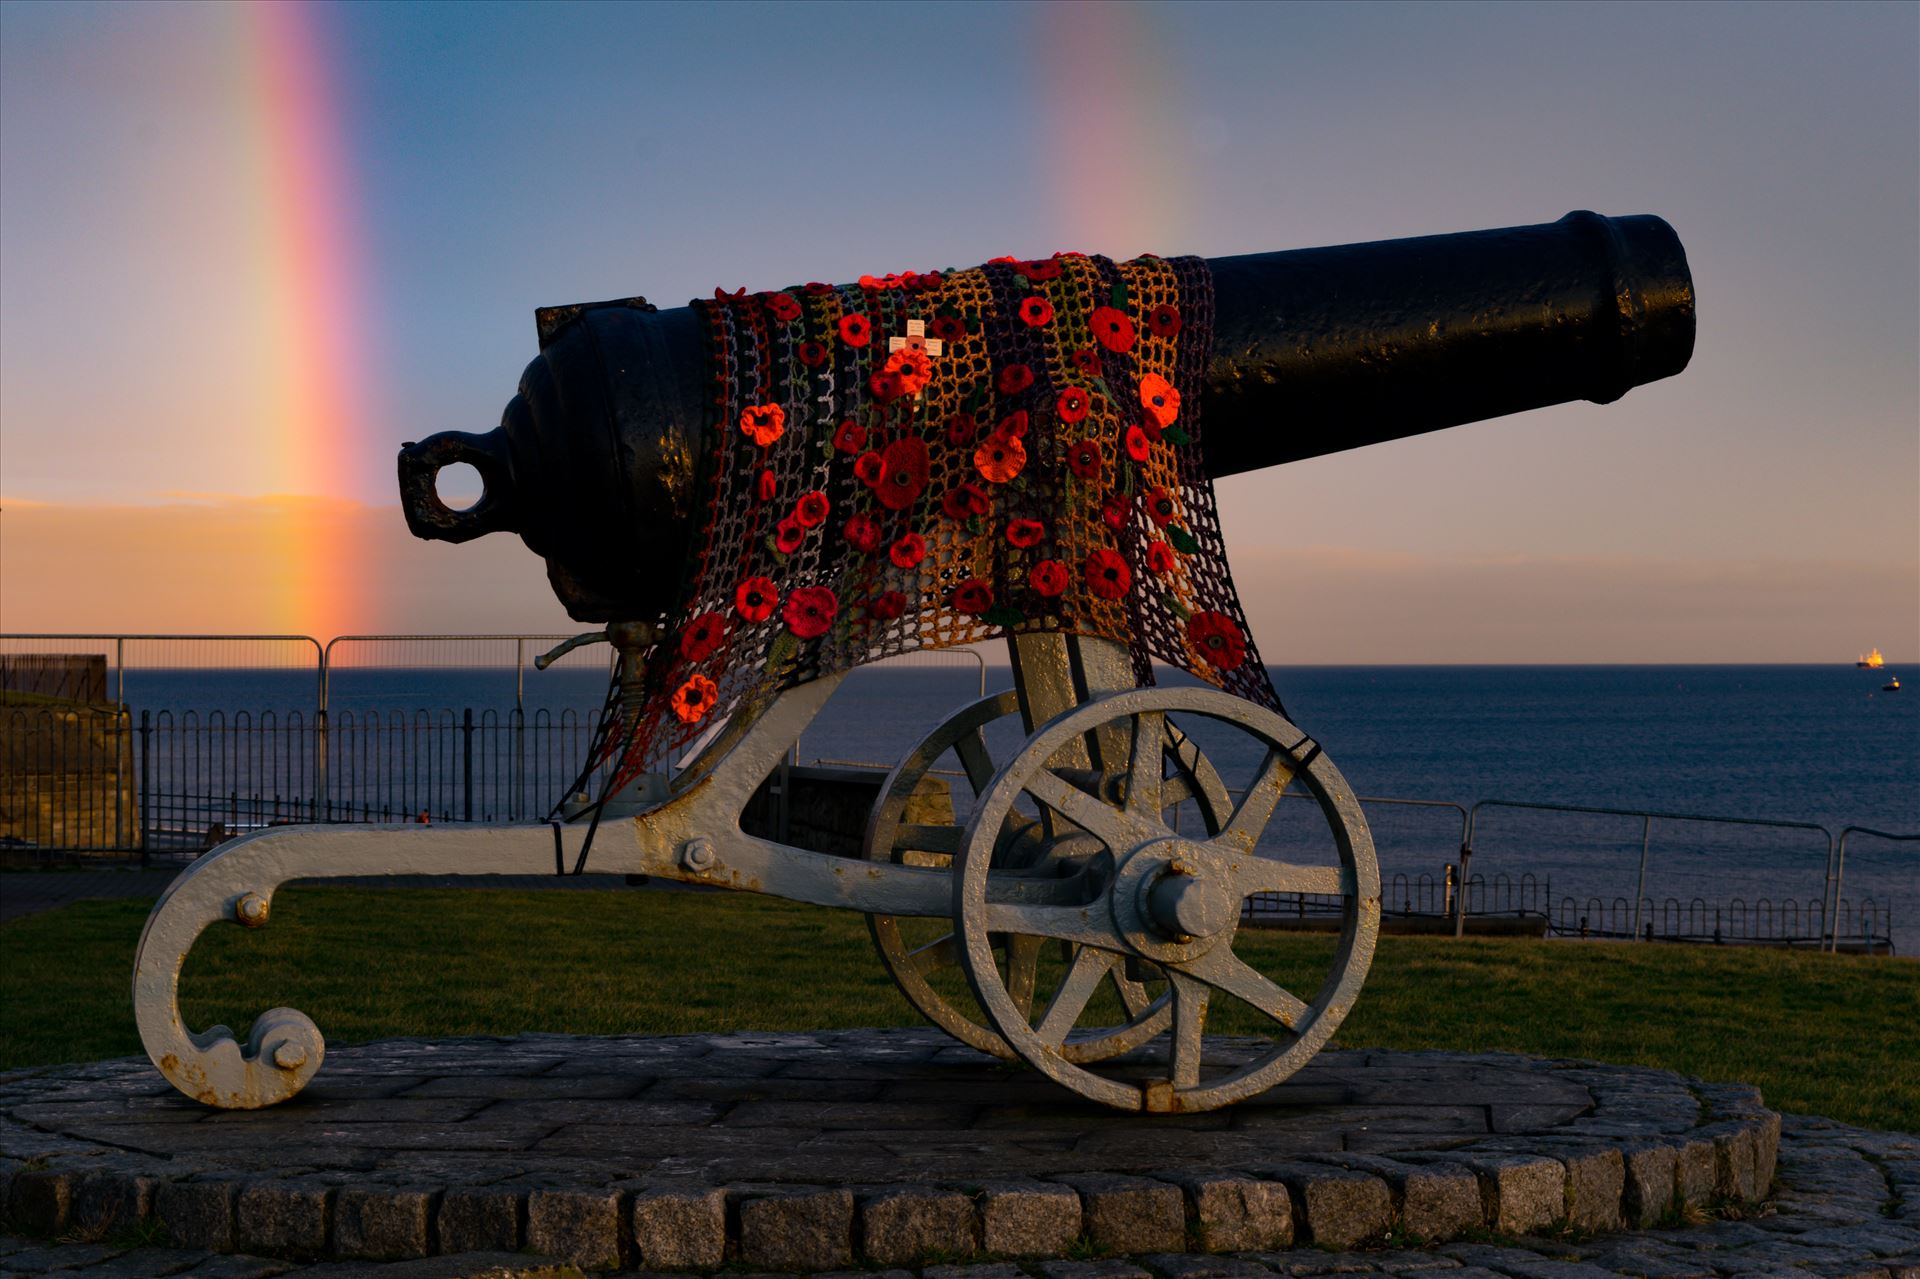 Cannon Double Rainbow - The Cannon at Hartlepool Headland with a Double rainbow behind it by AJ Stoves Photography